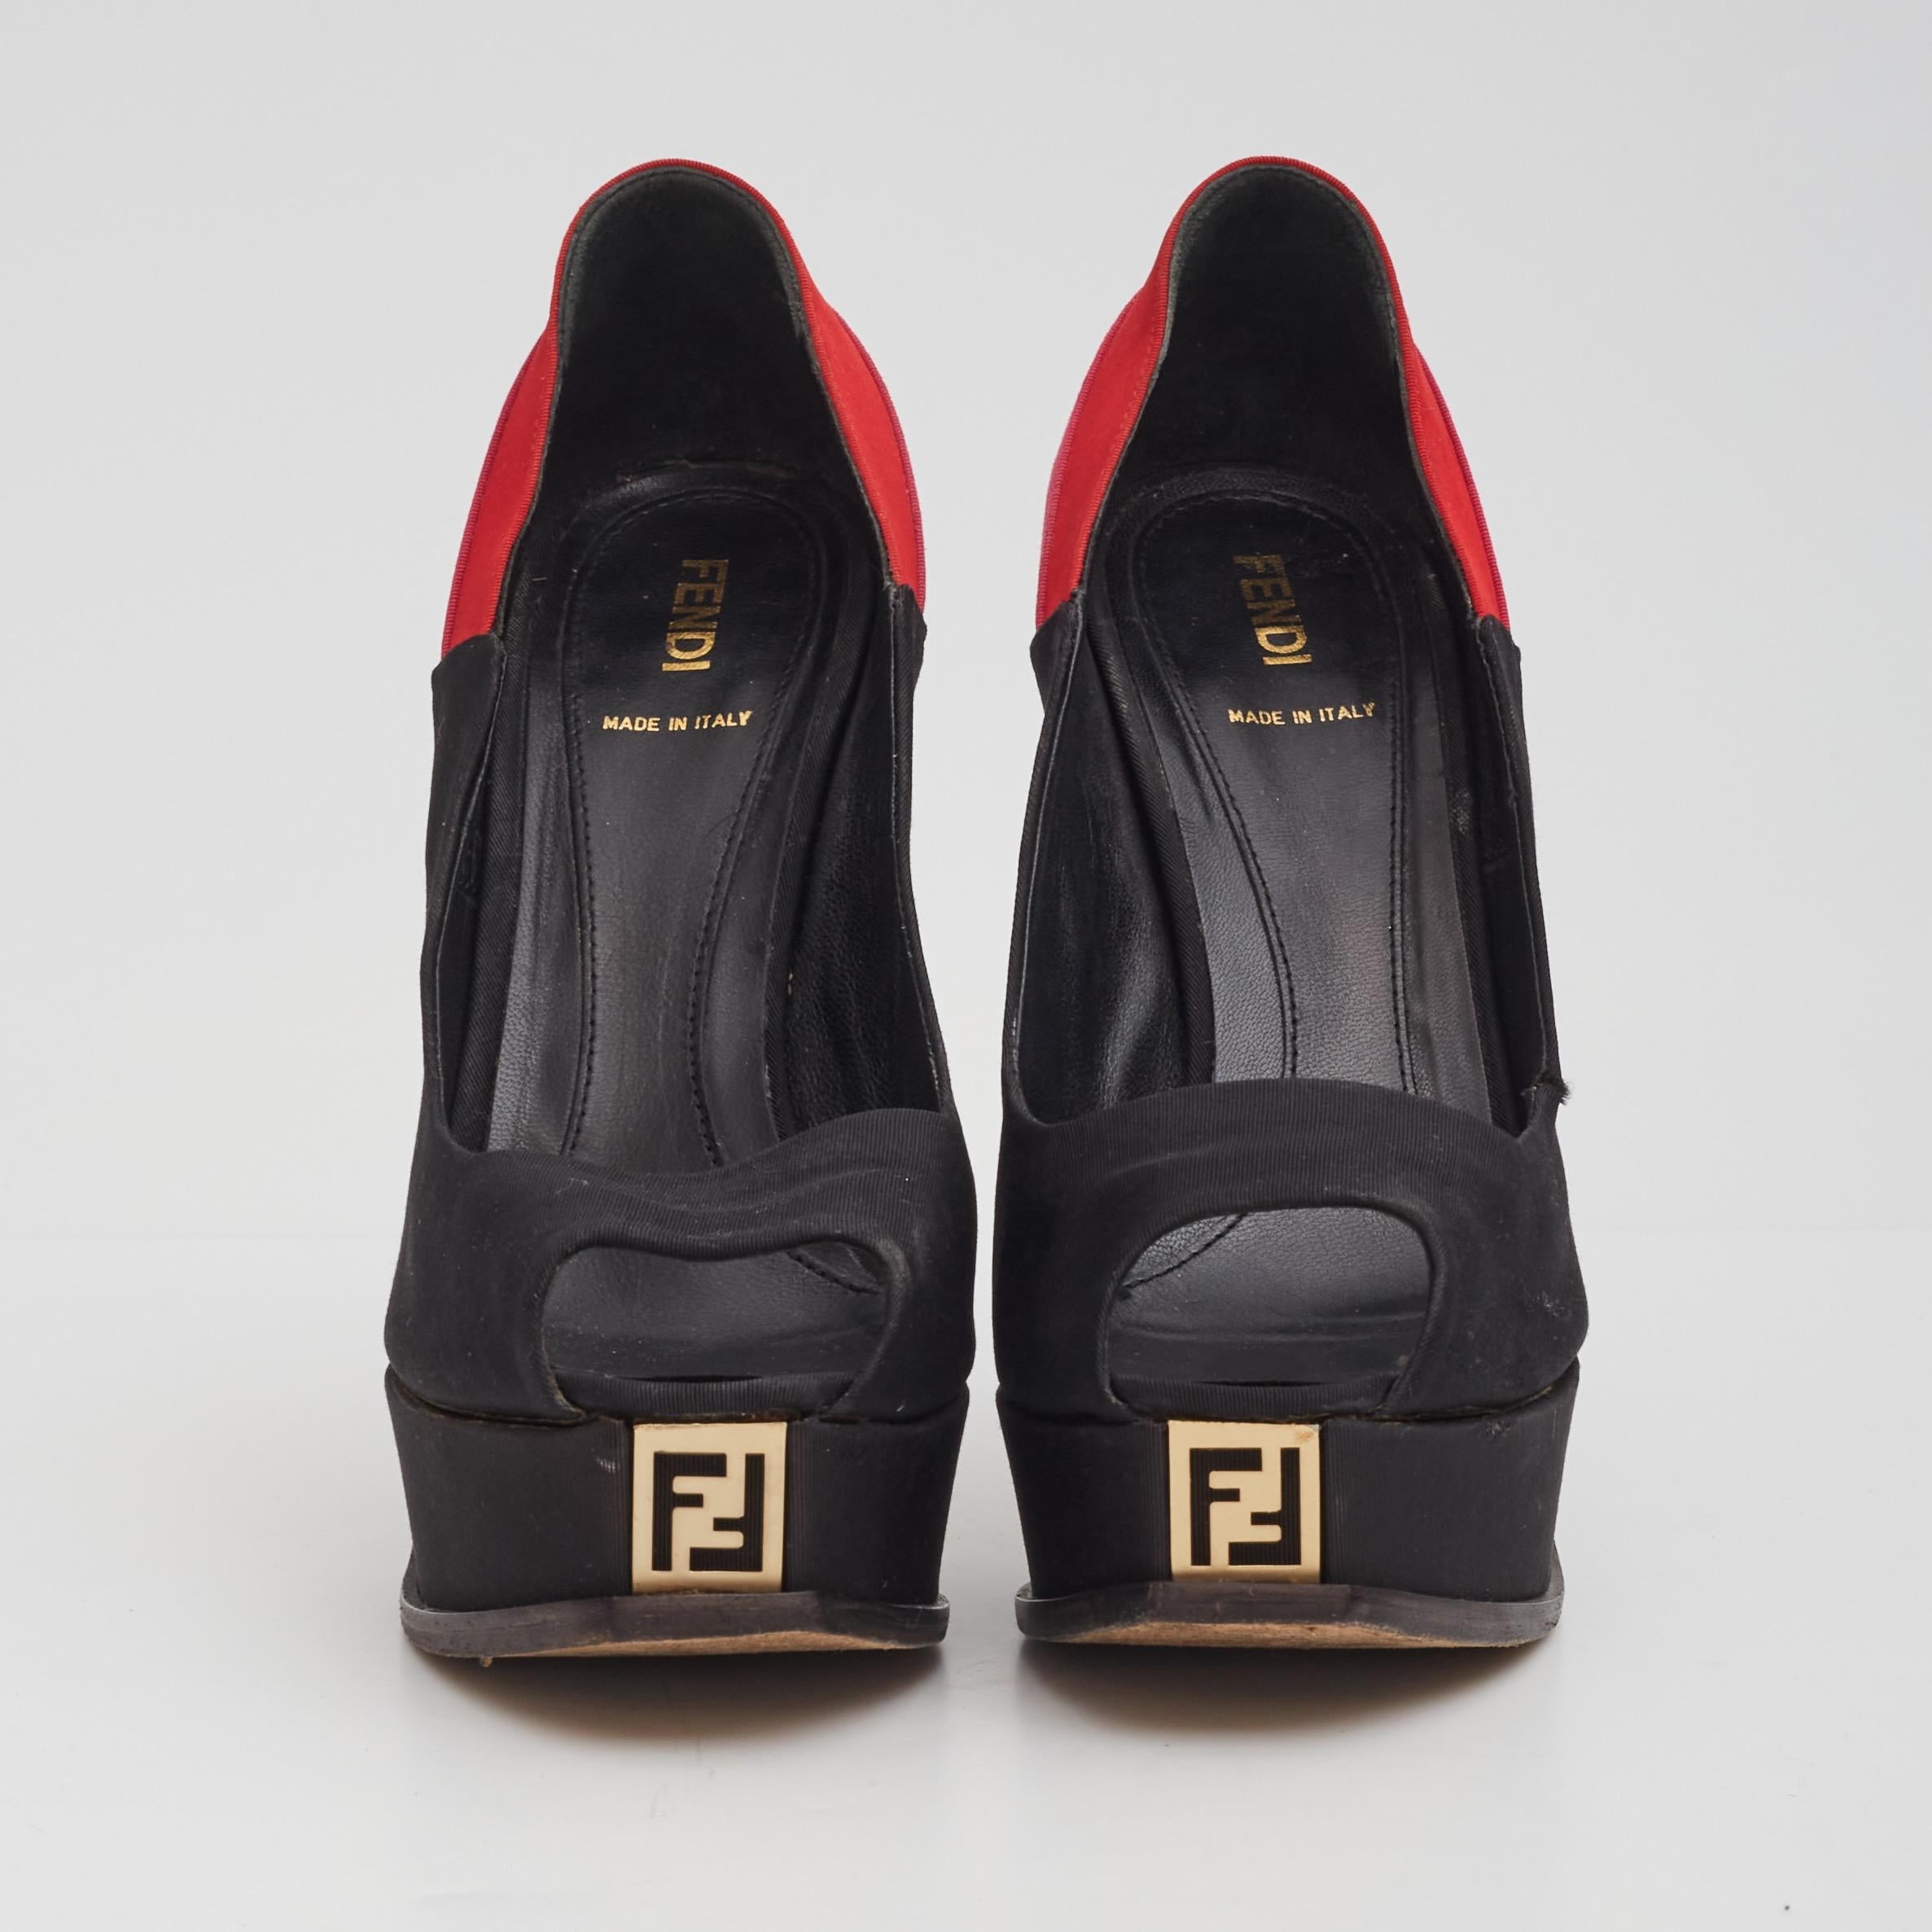 Color: Black with red heel
Material: Cloth
Size: 39 EU / 8 US
Heel Height: 140 mm / 5.5”
Platform Height: 25 mm / 1” 
Condition: Good. Wear includes scuffs, scrapes and stains to the outsoles. Scratches, scuffs, and marks to uppers.

Made In Italy